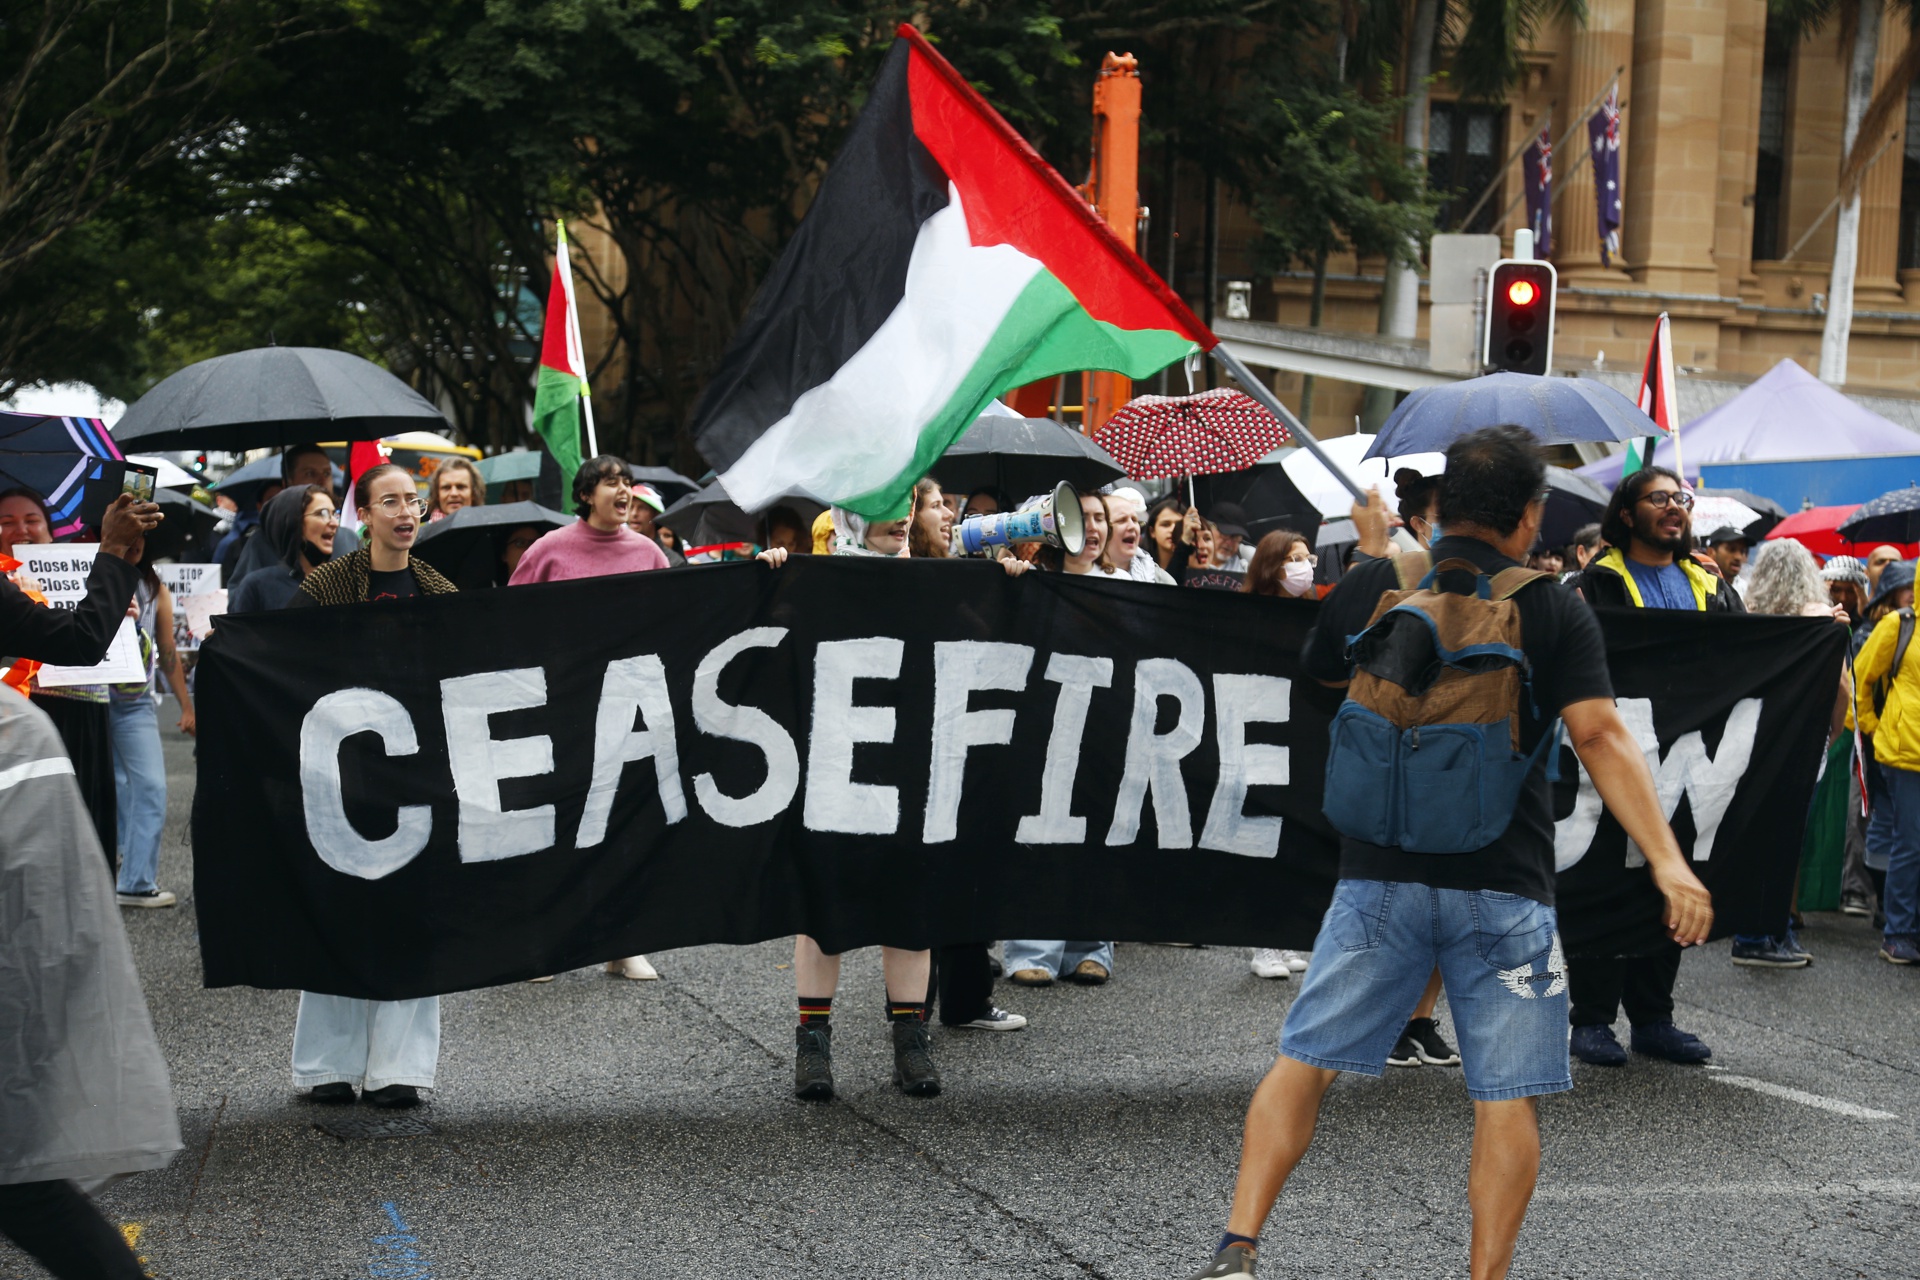 Ceasefire now, Meanjin/Brisbane, March 24